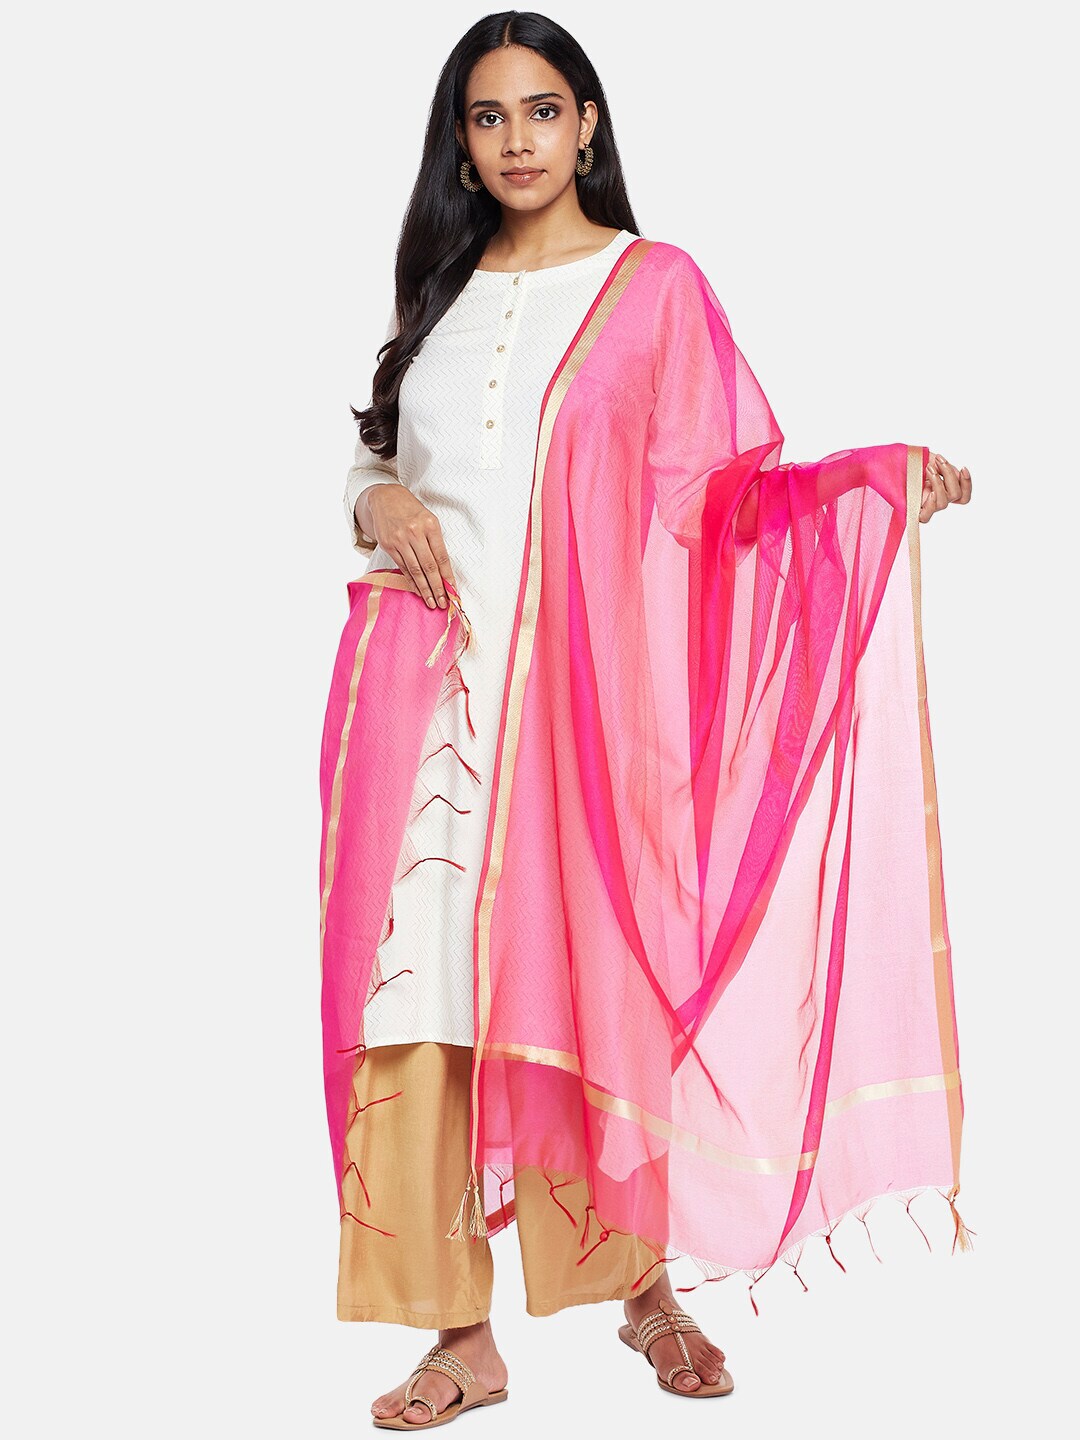 RANGMANCH BY PANTALOONS Fuchsia & Gold-Toned Solid Dupatta Price in India